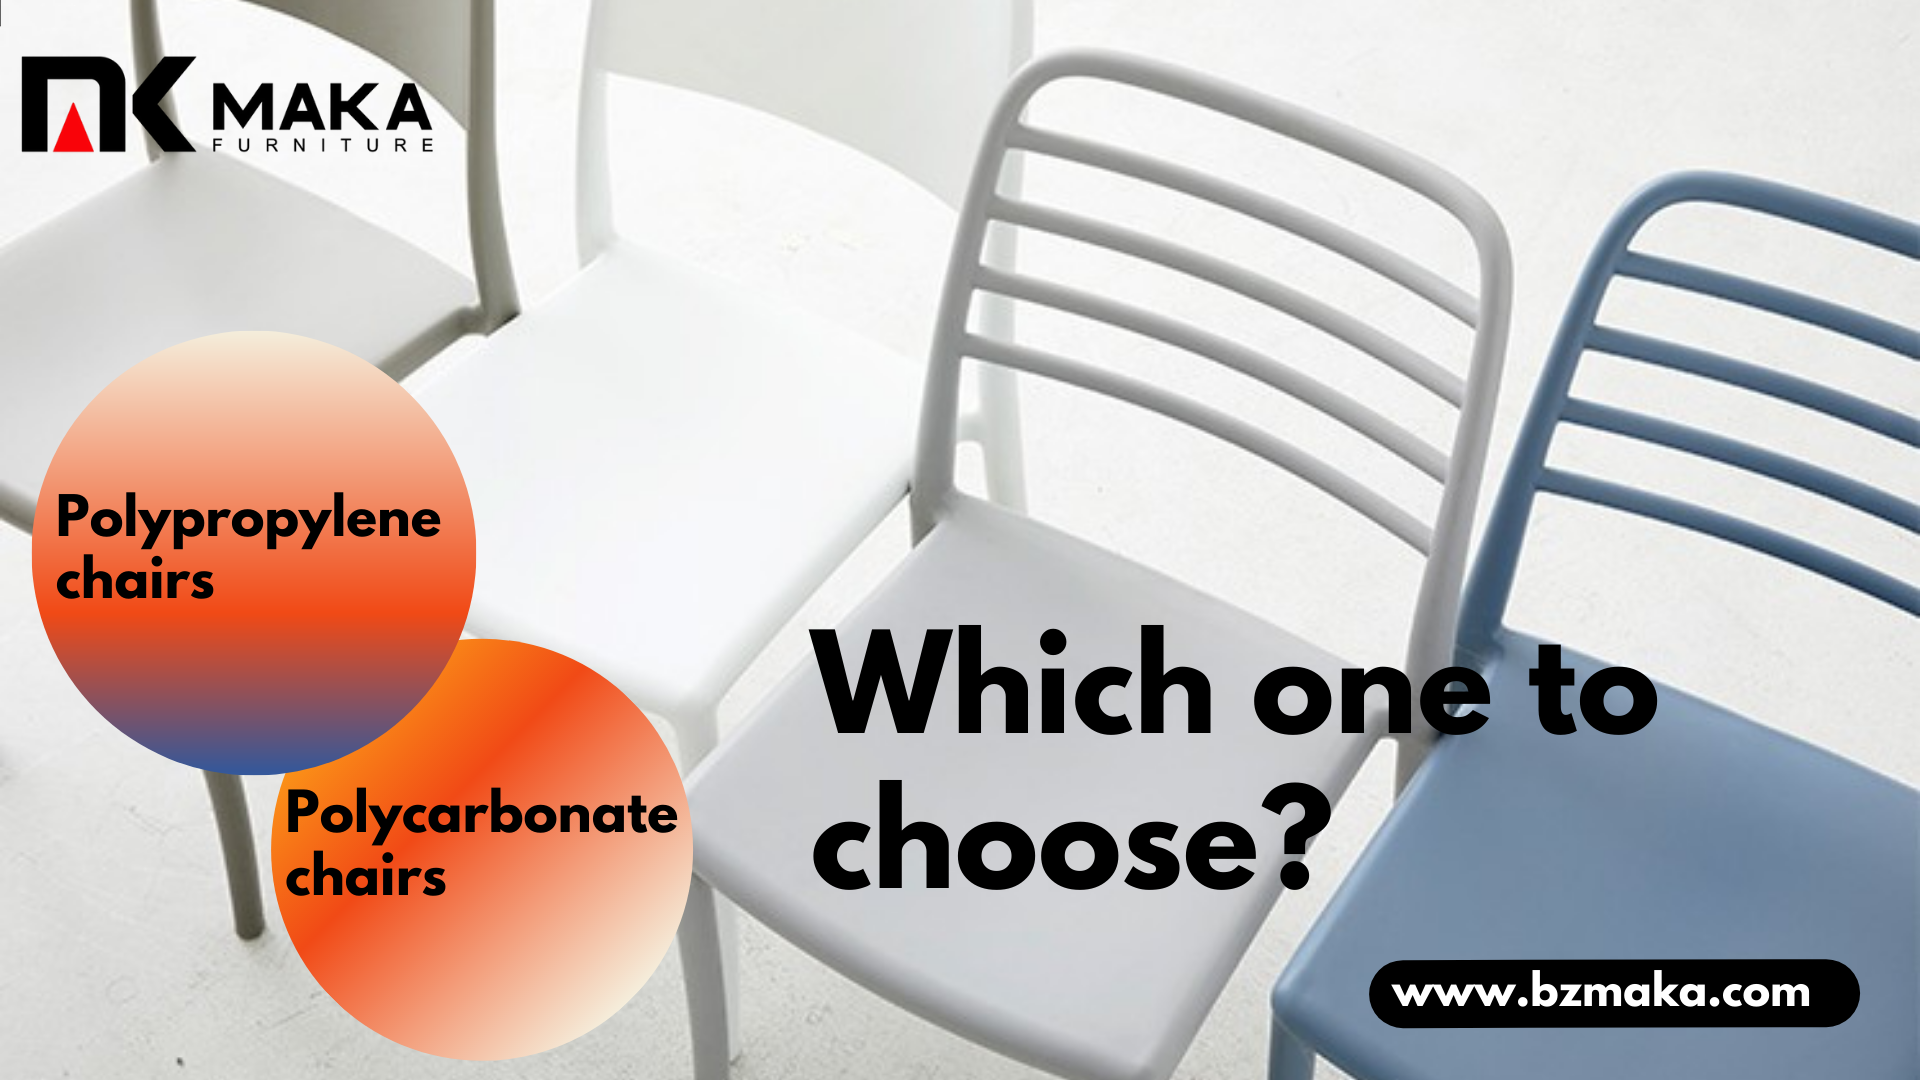 Polypropylene or polycarbonate chairs which one to choose